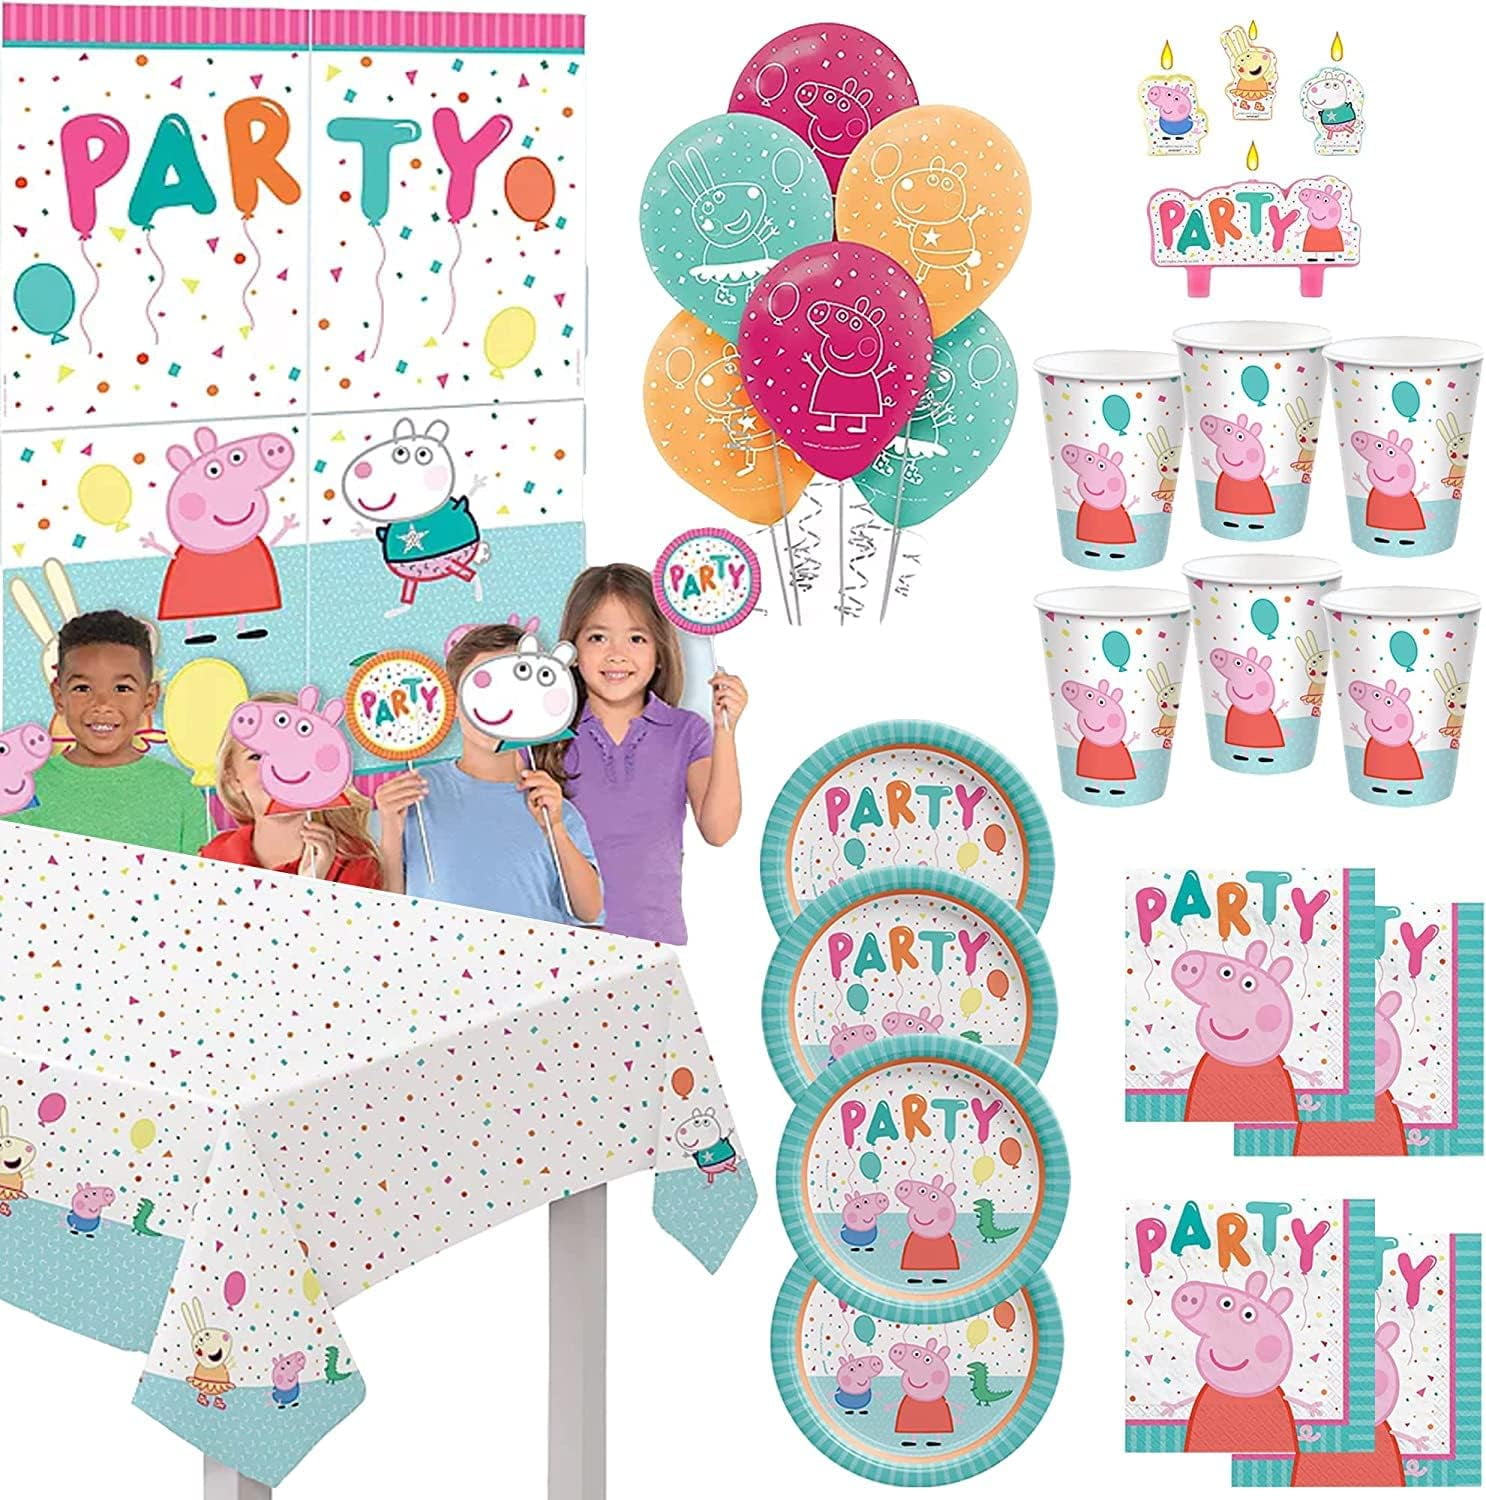 Peppa Pig Birthday Party Supplies and Decoration Pack for 16: Plates, Napkins, Cups, Table cover, Candle, Peppa Pig Balloons, Wall Decoration kit, Yellow and Orange Balloons - Walmart.com